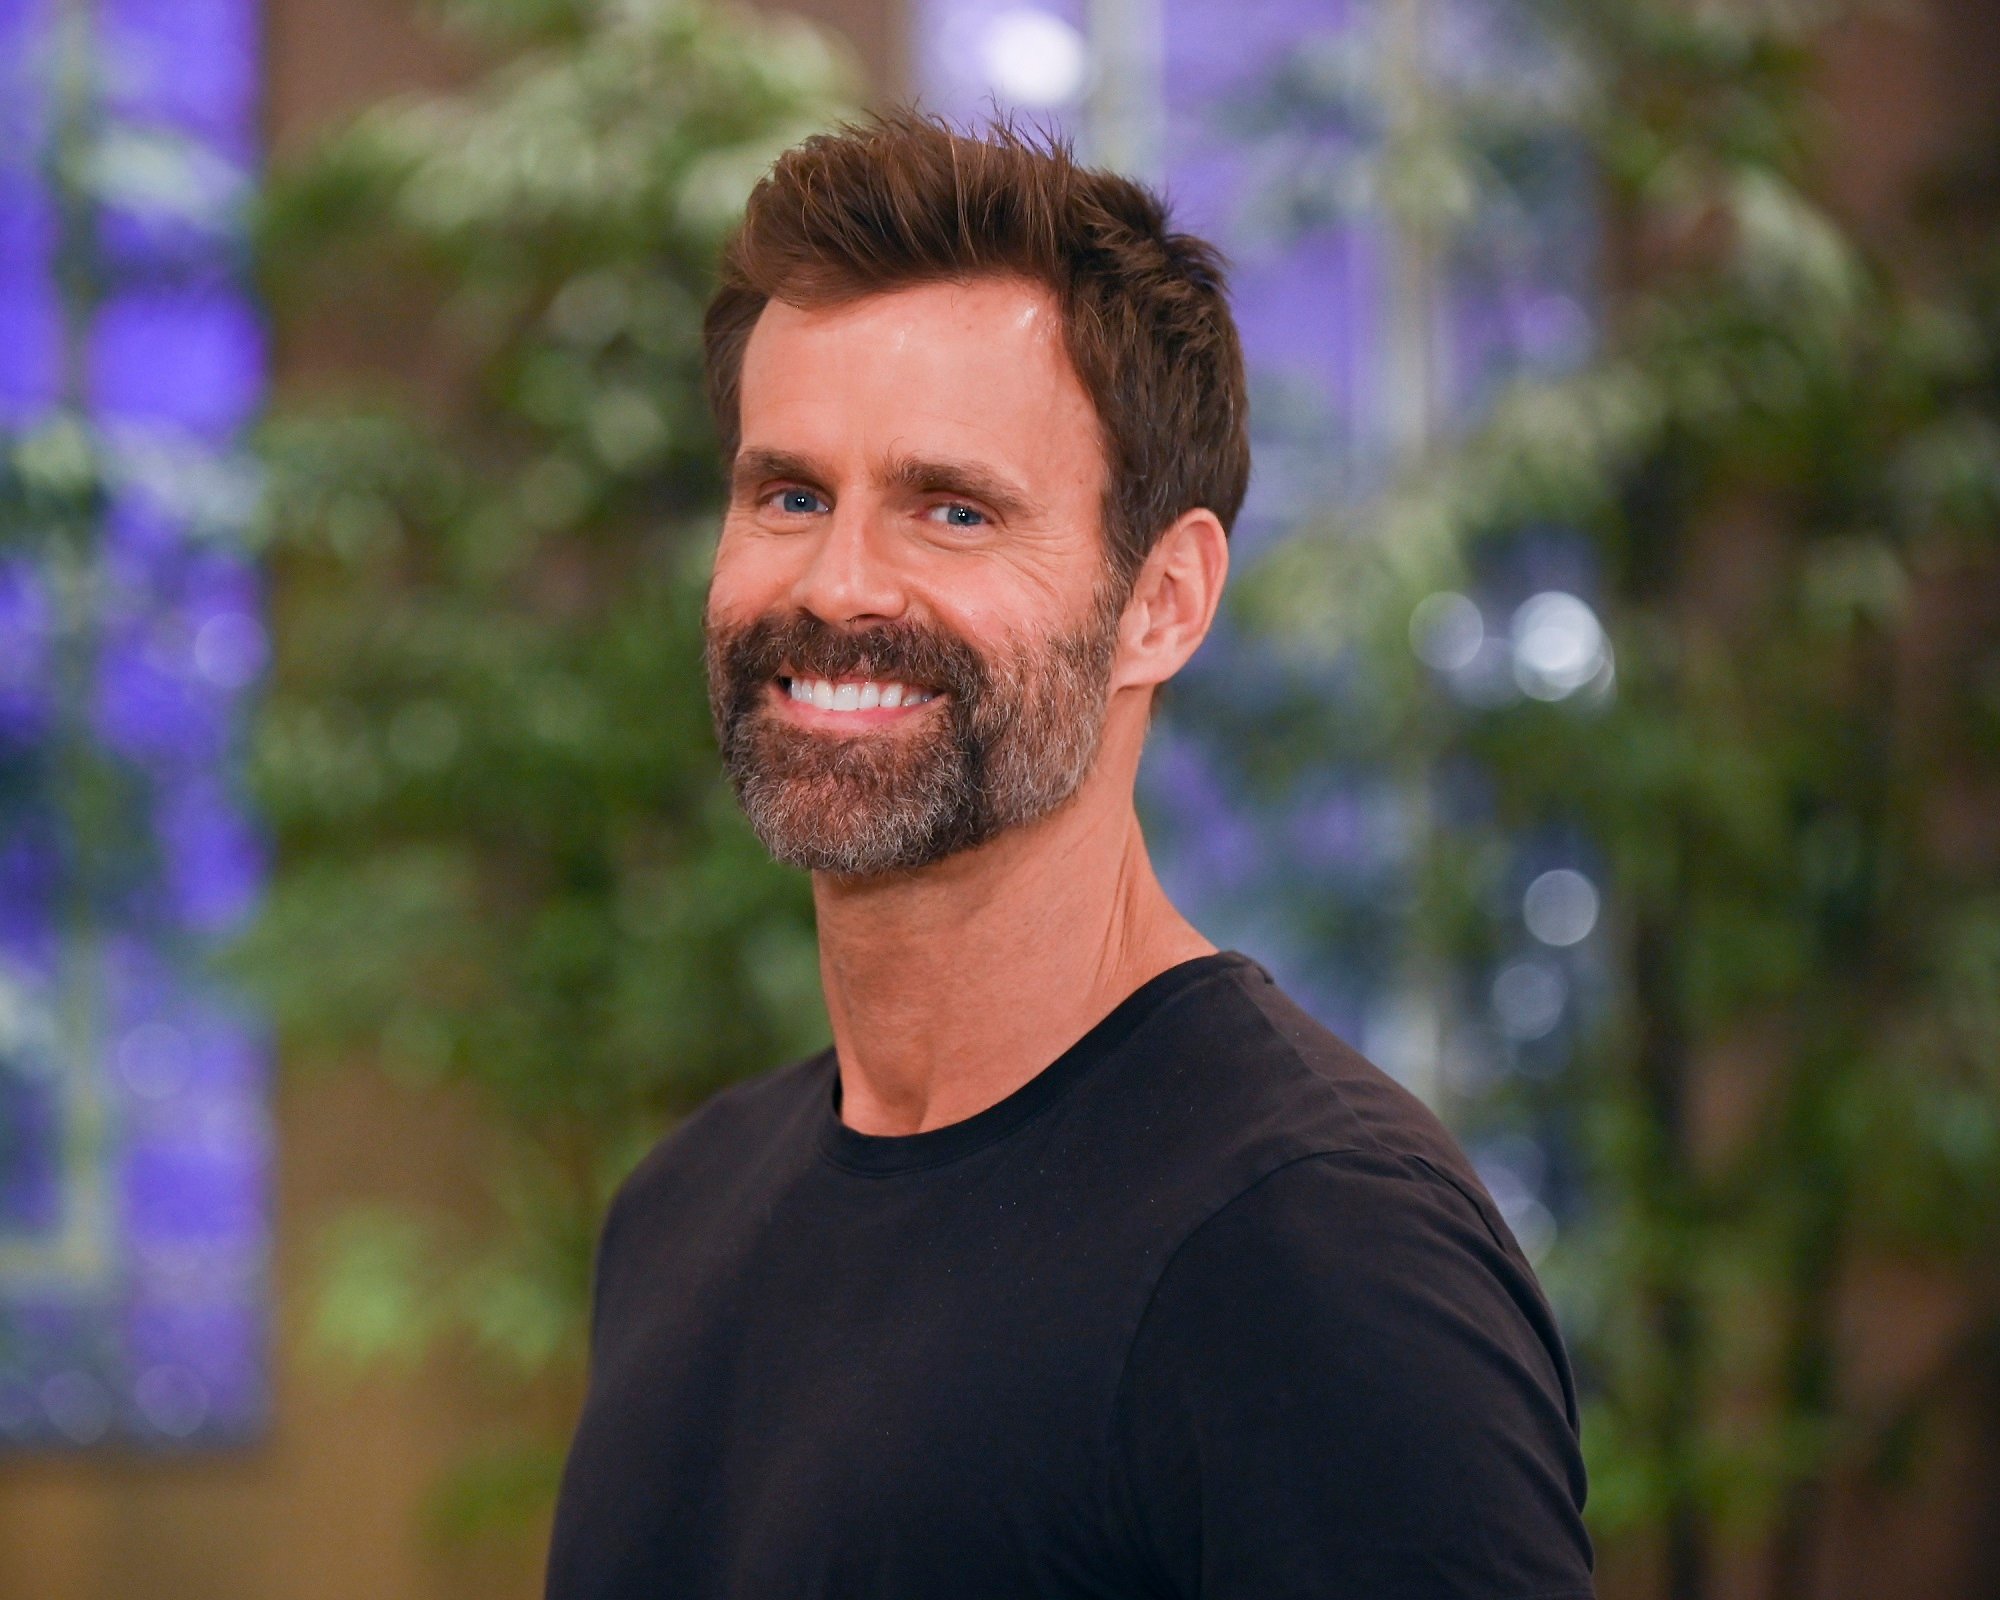 General Hospital star Cameron Mathison, pictured here in a greying beard wearing a black shirt, against a background featuring green plants and blue wallpaper